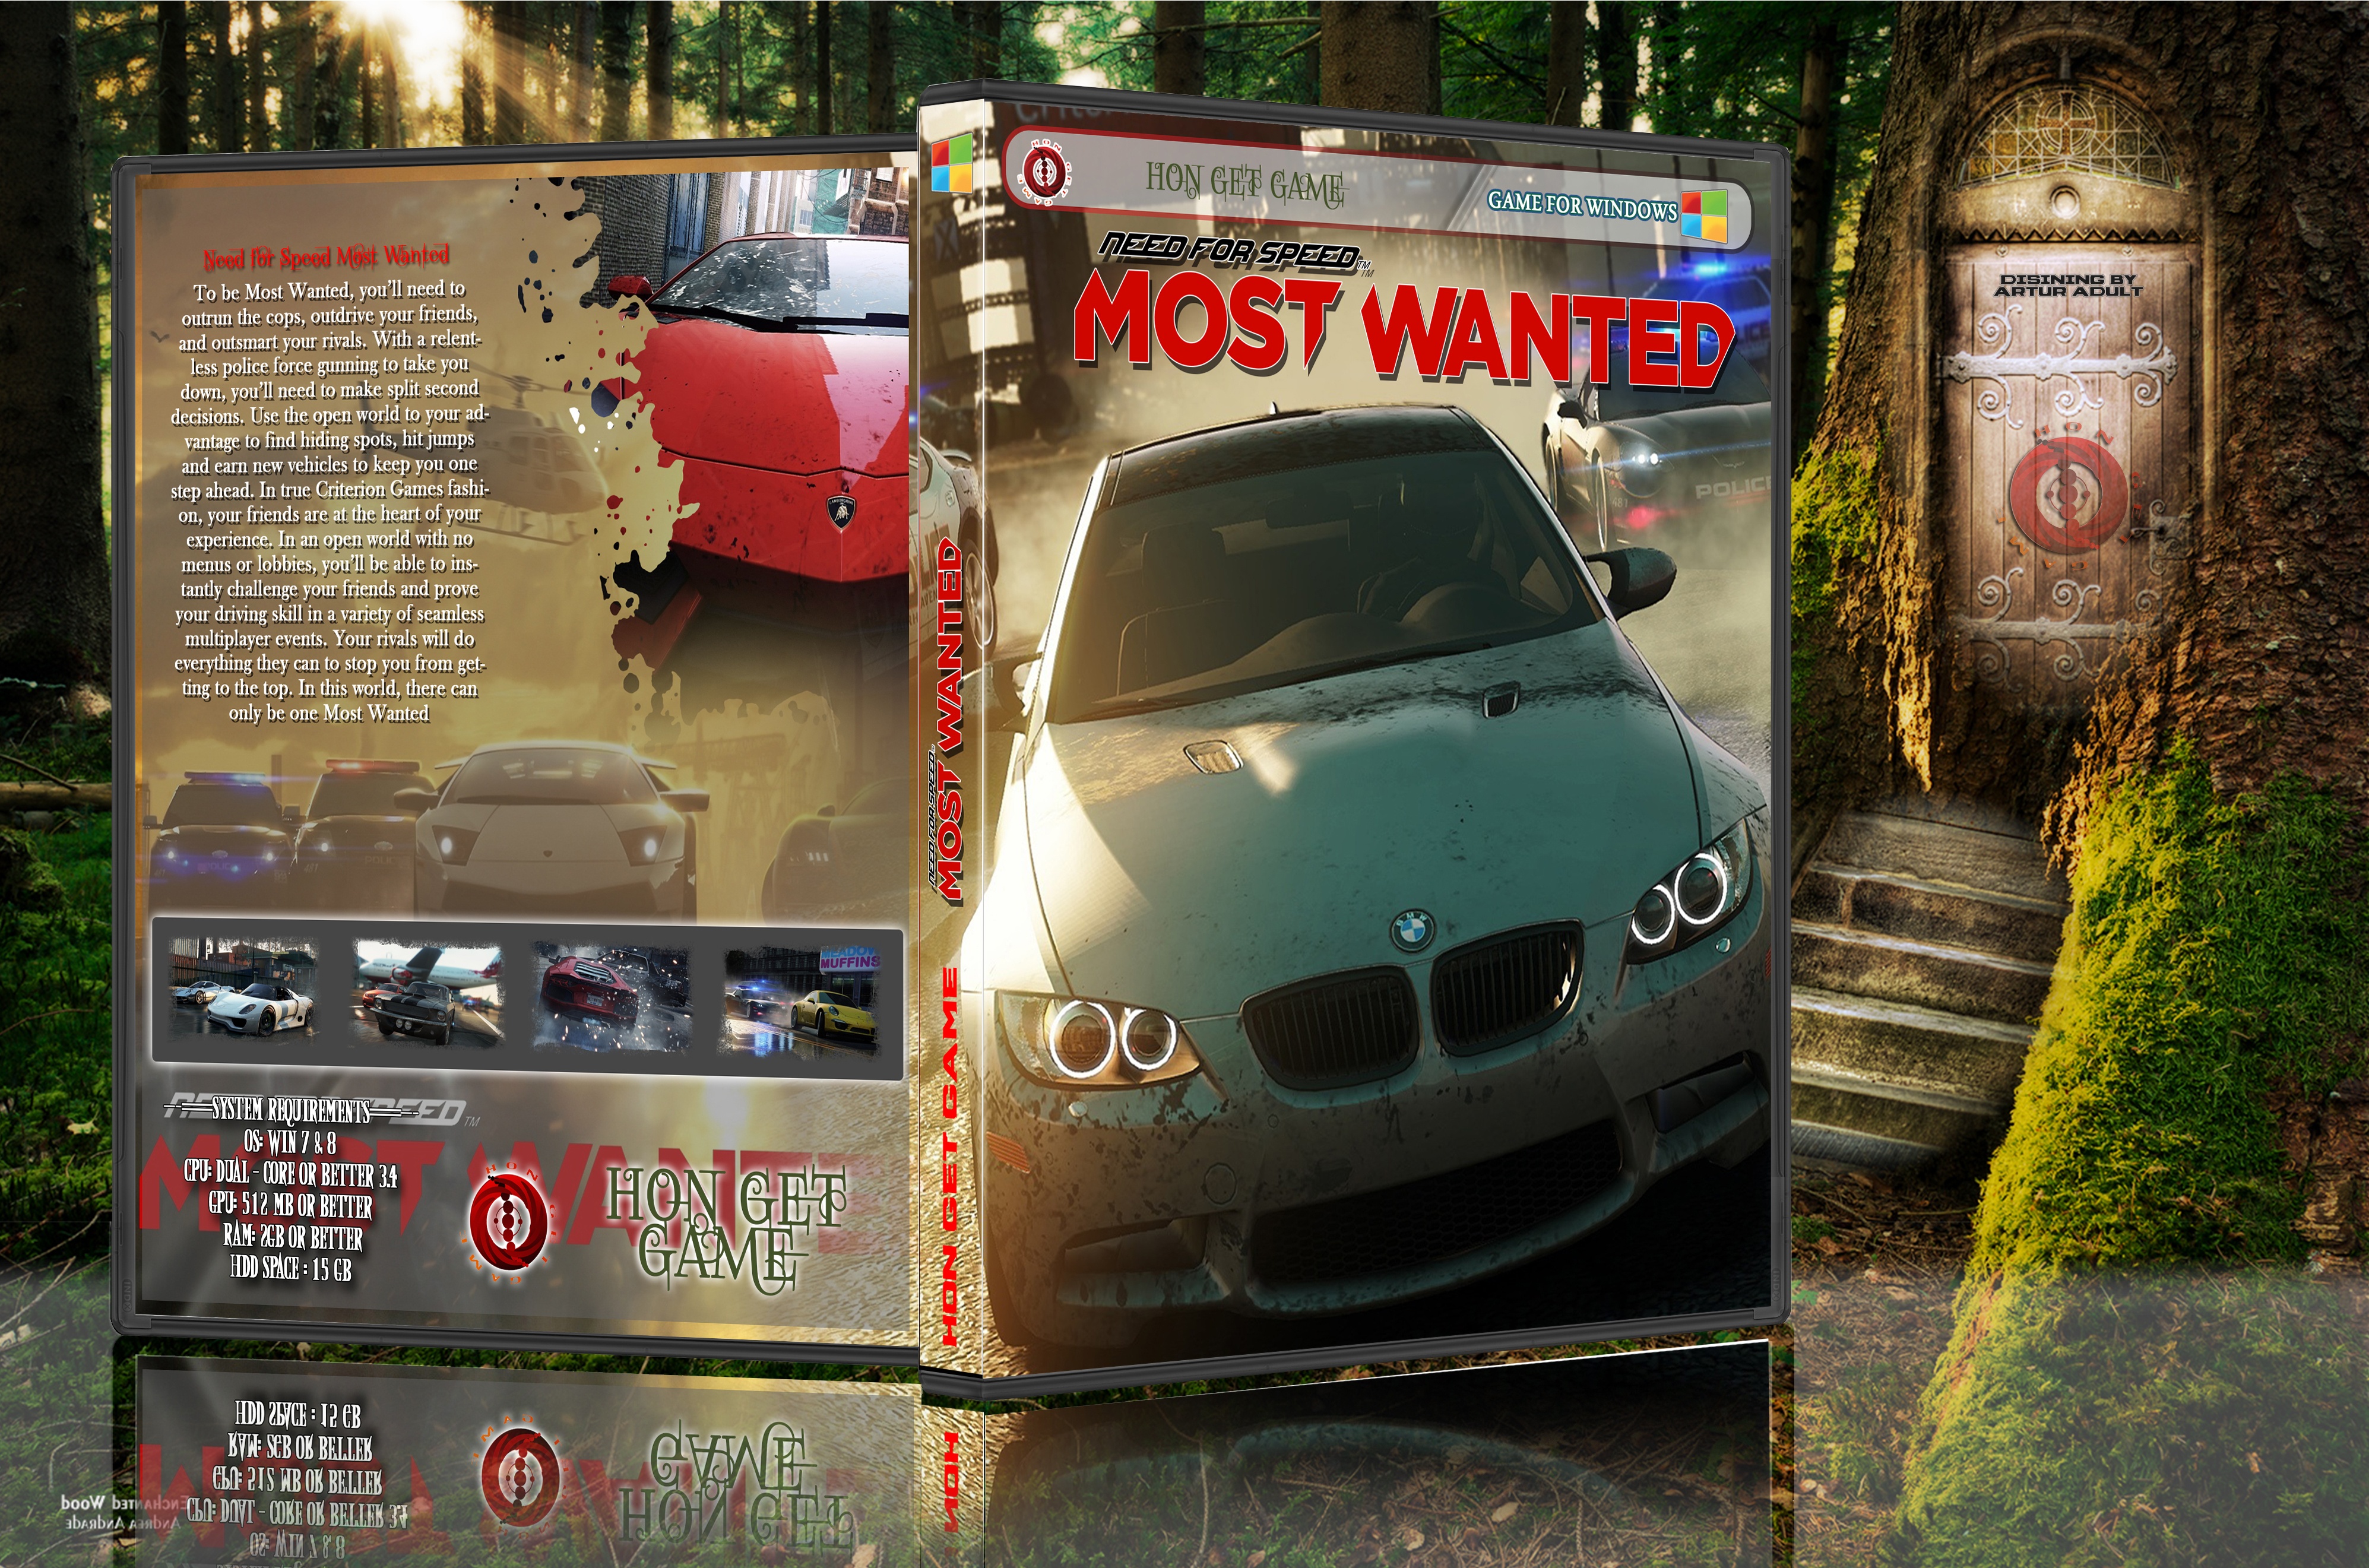 Need For Speed : Most Wanted box cover